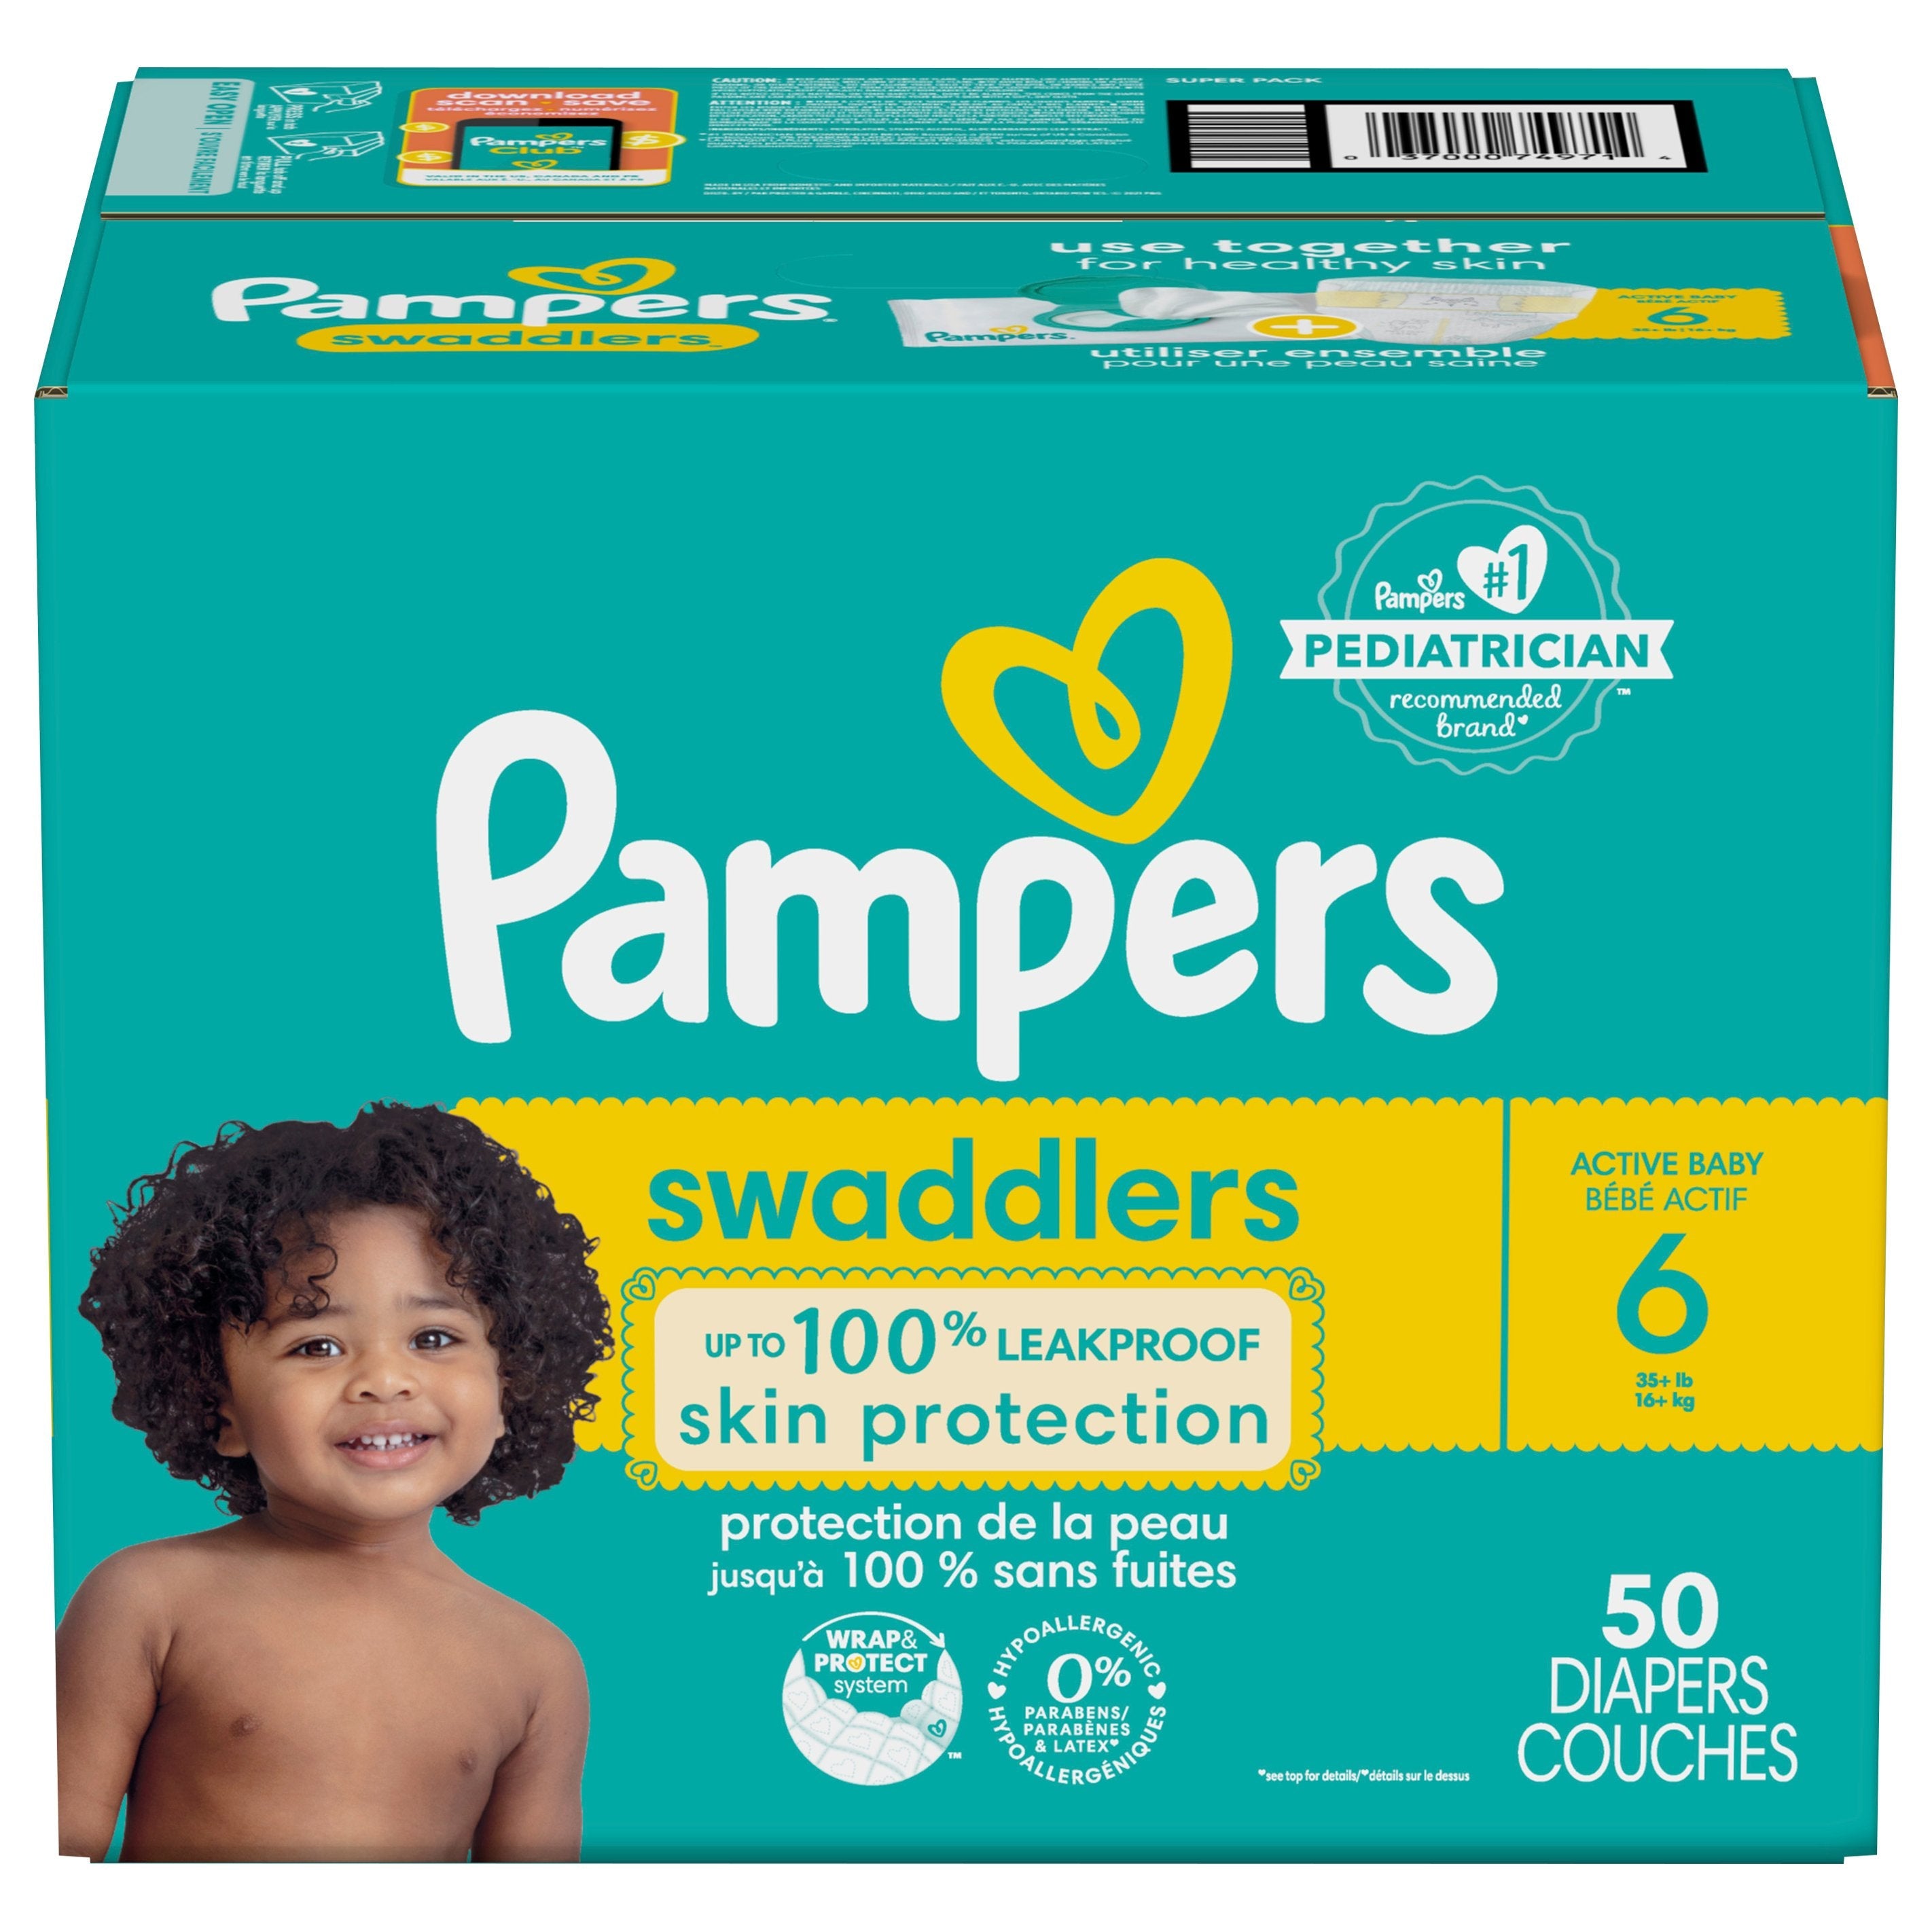 Couches Pampers Taille 3 MEGA PACK - Pampers